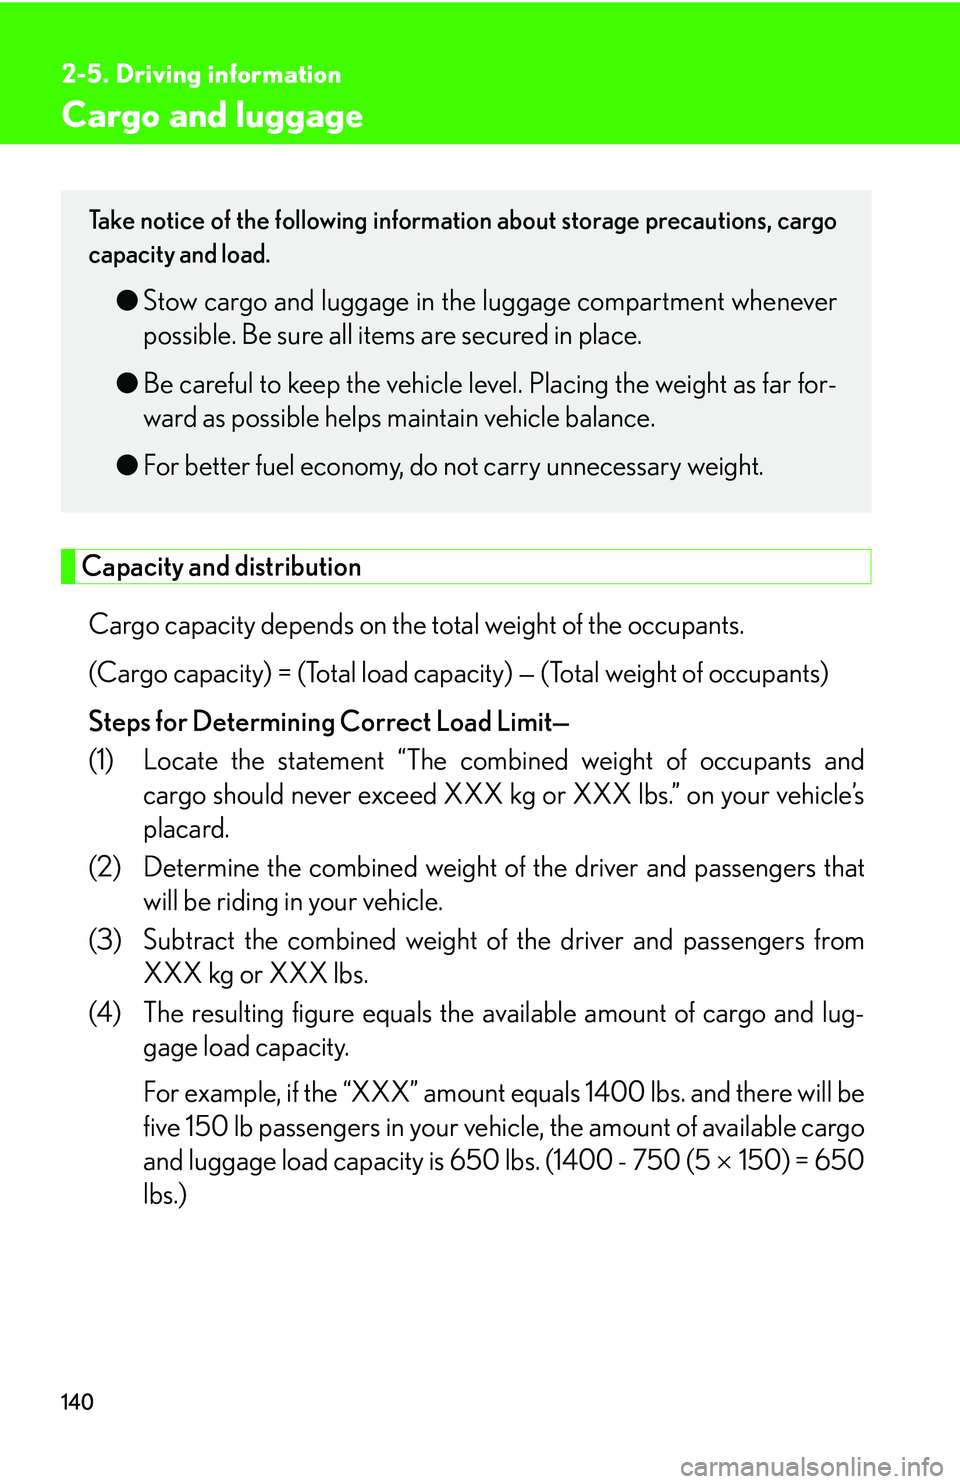 Lexus GX470 2007  Audio/Video System / LEXUS 2007 GX470 OWNERS MANUAL (OM60C64U) 140
2-5. Driving information
Cargo and luggage
Capacity and distributionCargo capacity depends on the to tal weight of the occupants. 
(Cargo capacity) = (Total load capa city) — (Total weight of oc